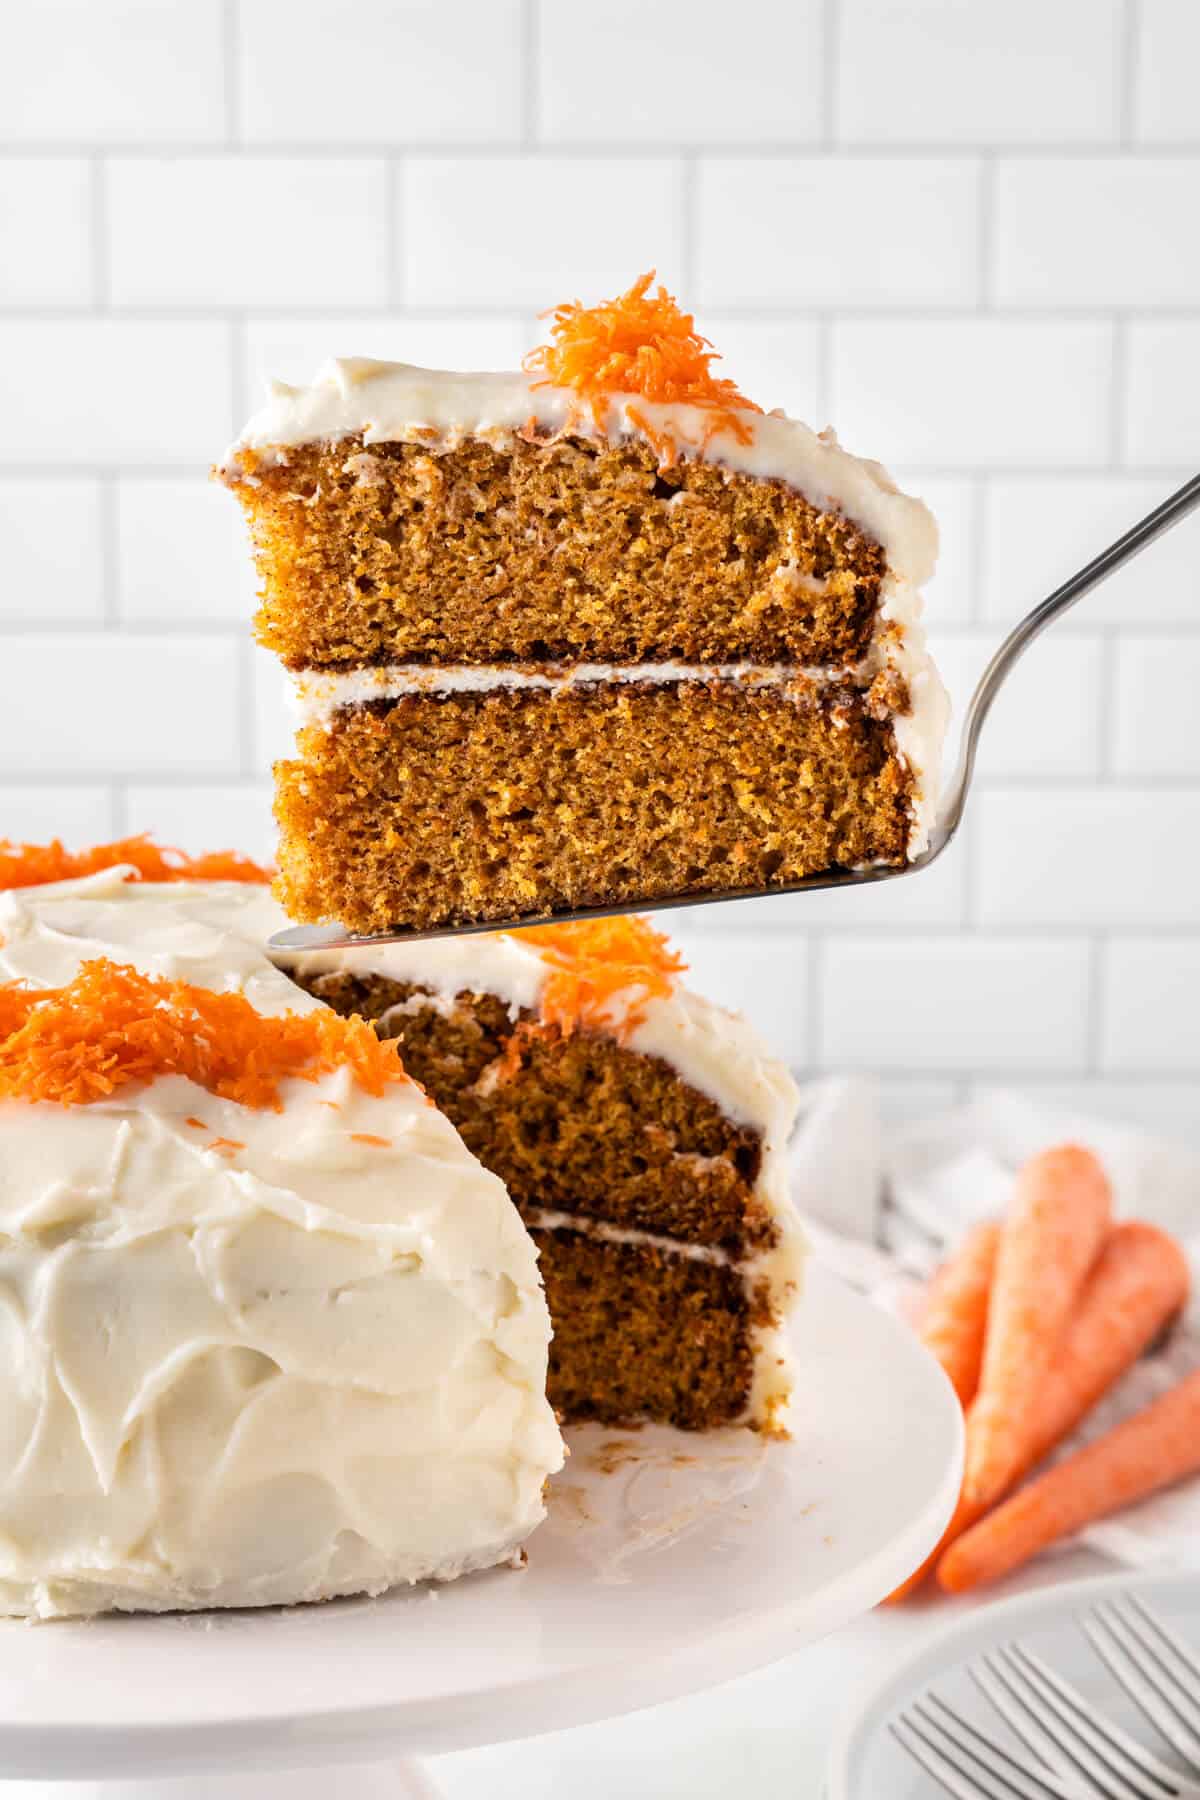 A slice of carrot cake on a serving spatula.